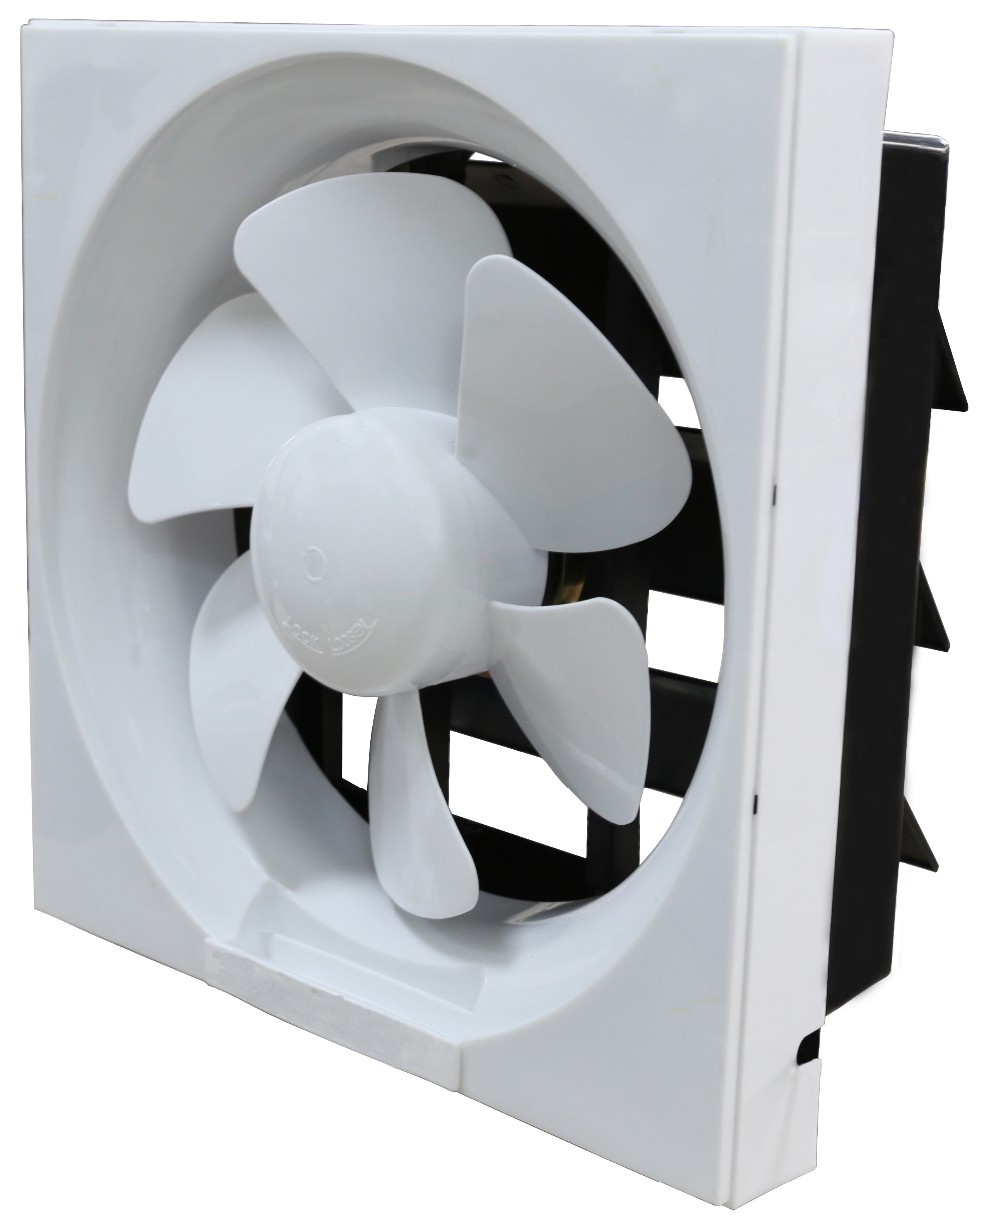 new product DC exhaust fan on m.alibaba.com